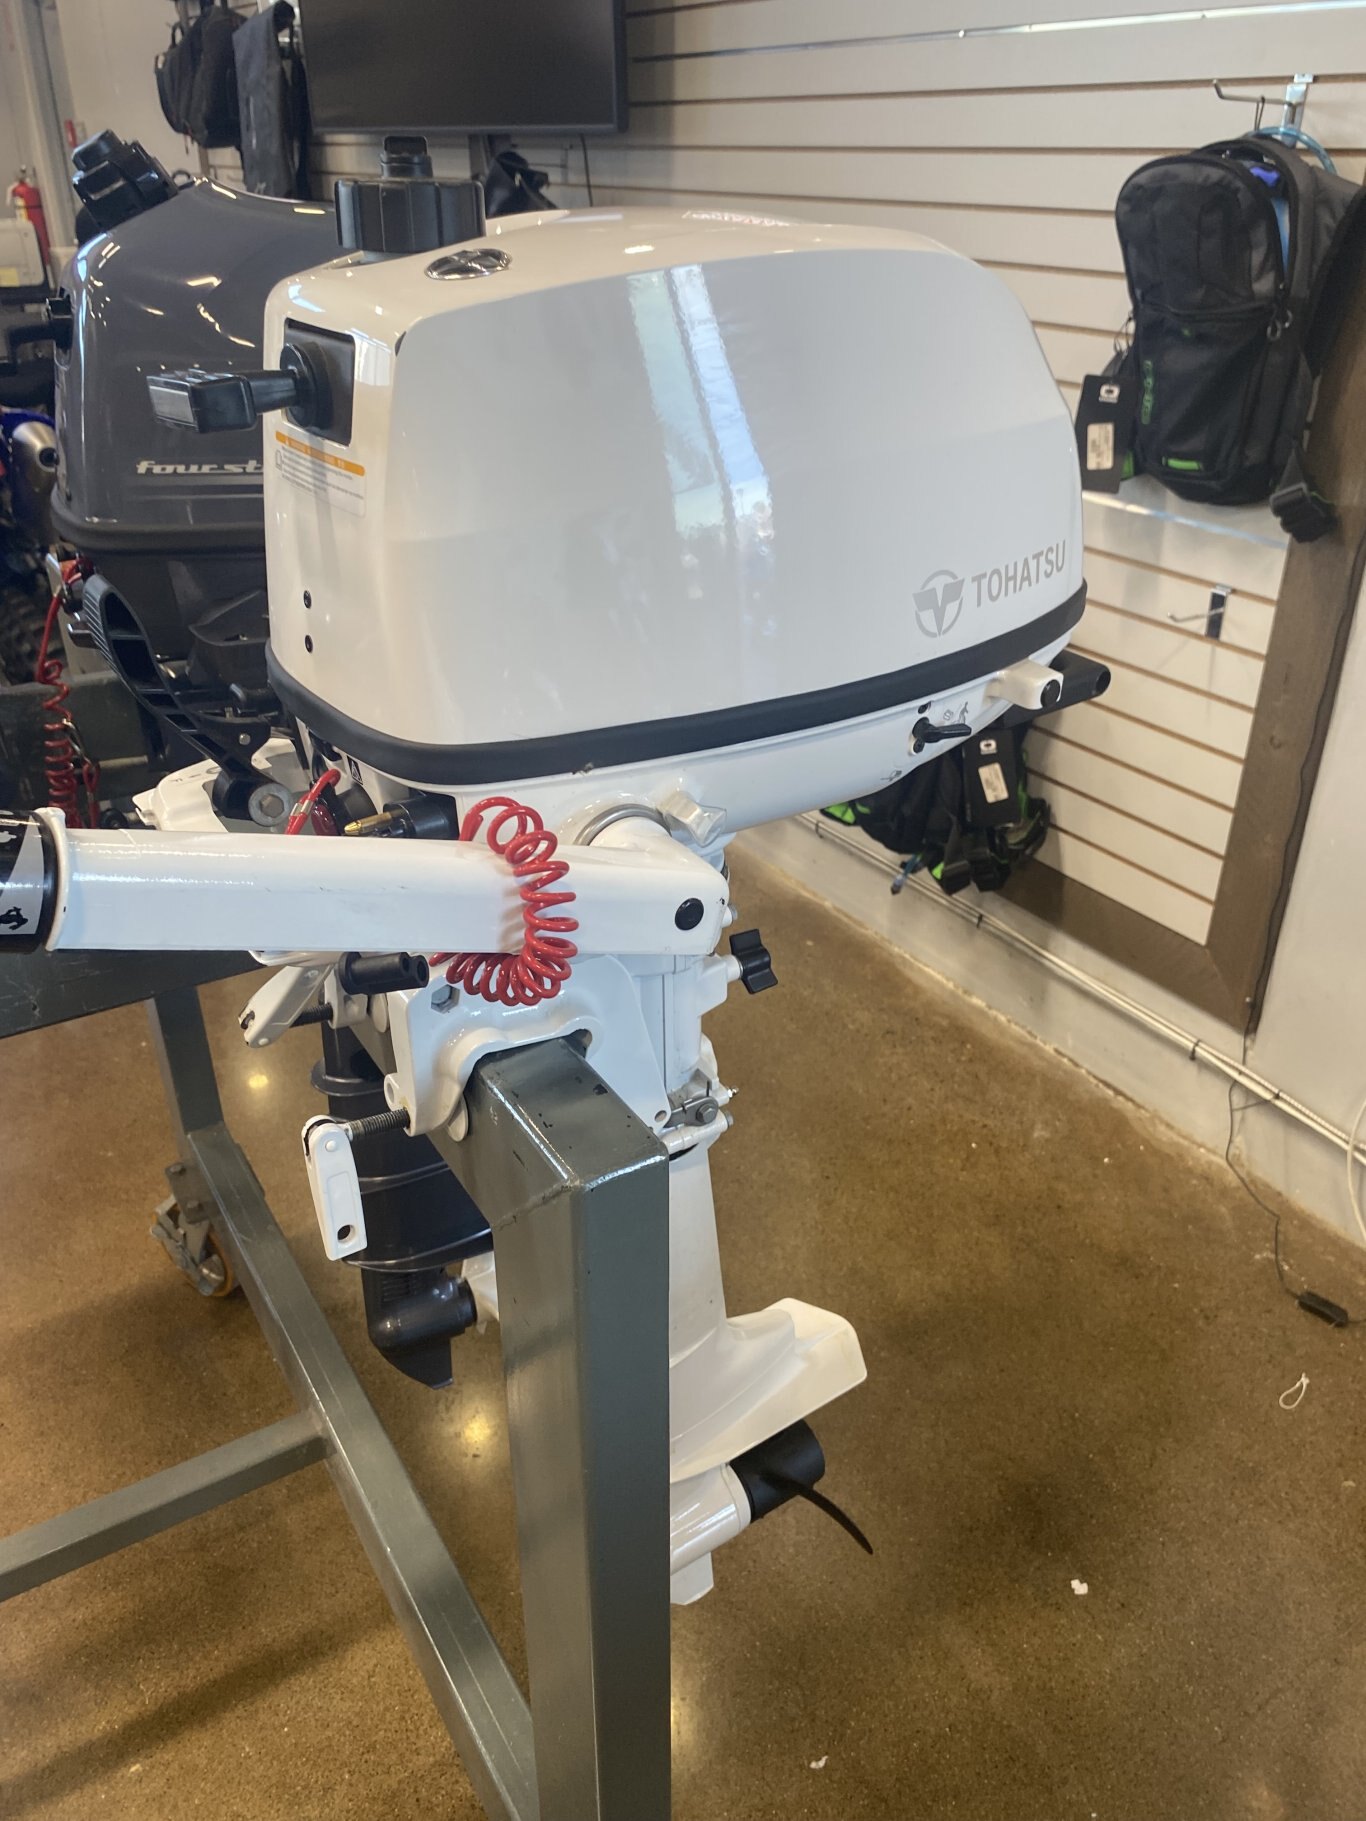 Barely used Tohatsu 6HP Outboard